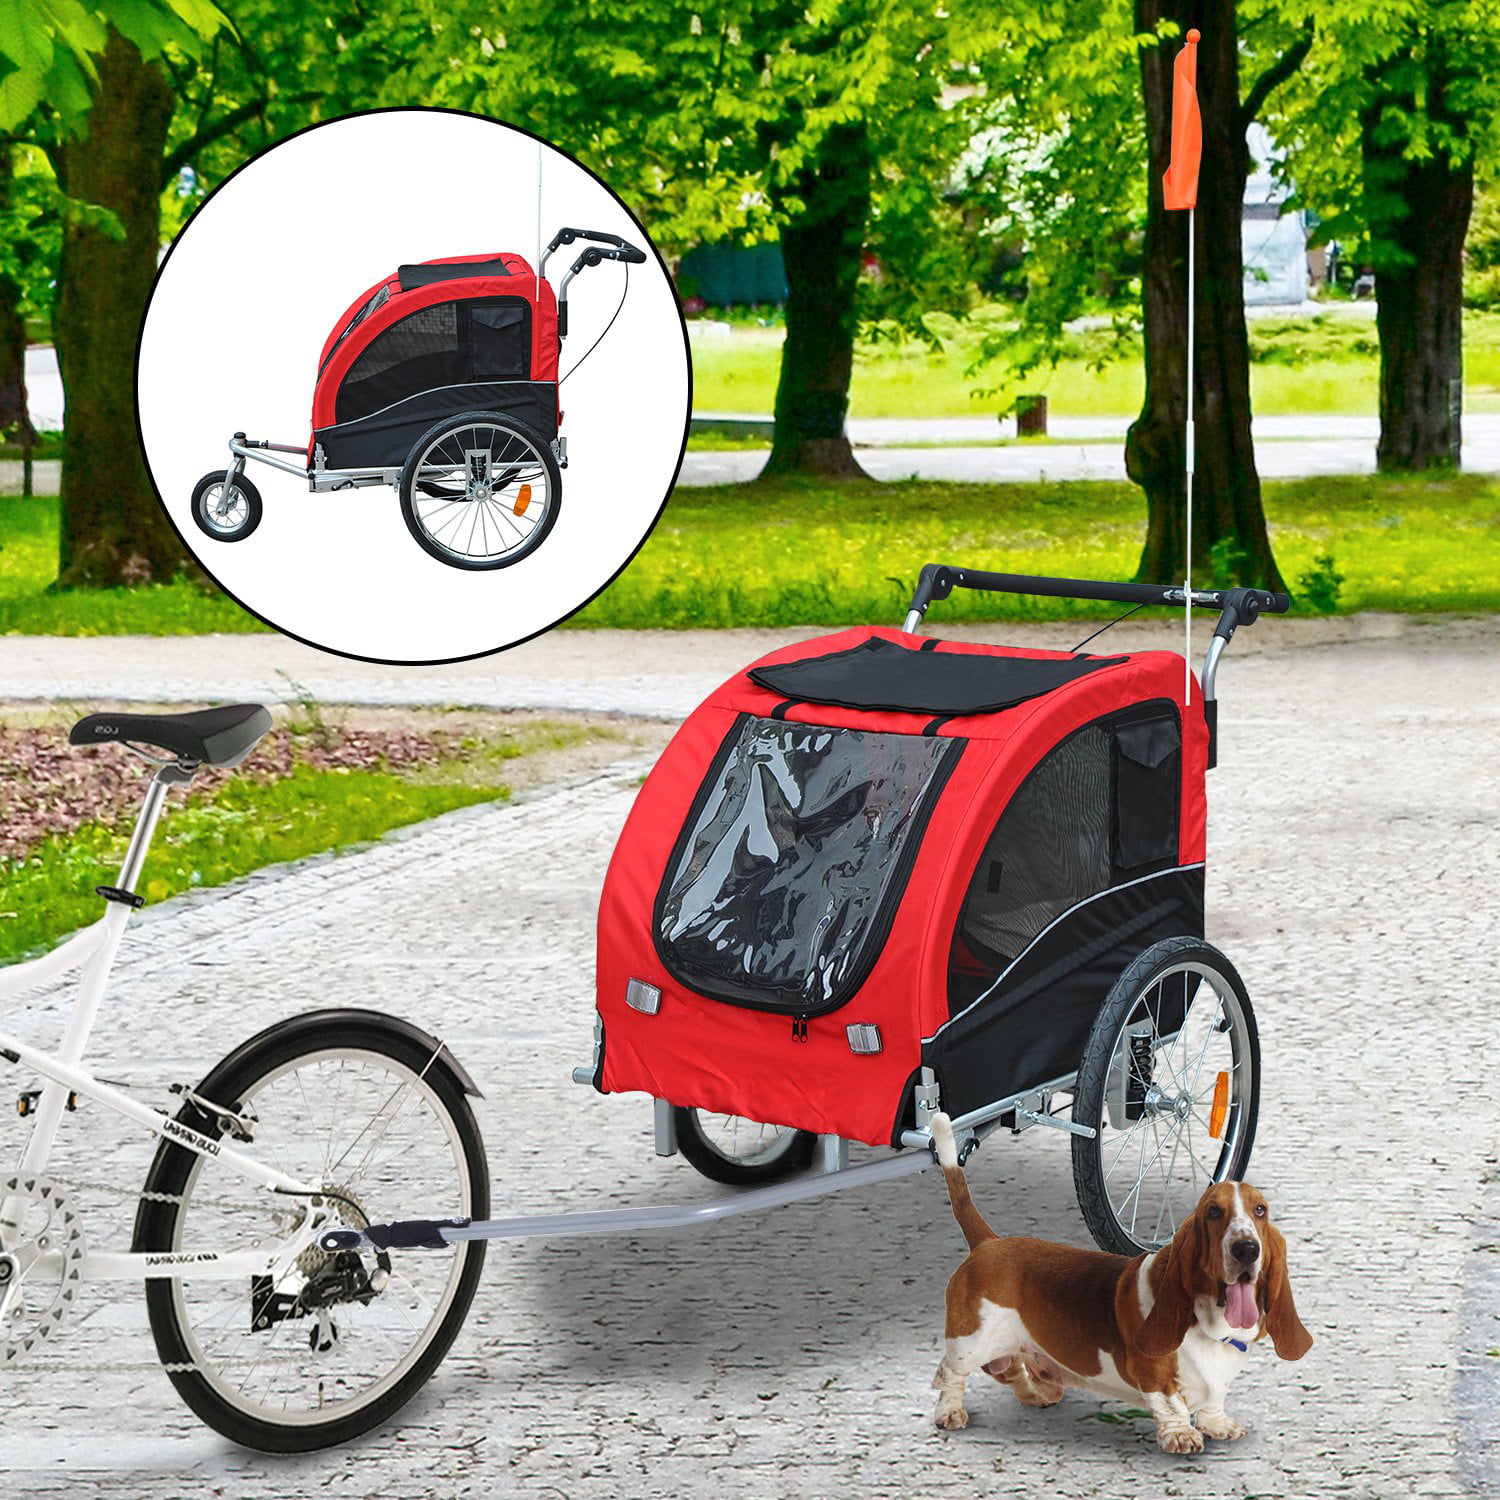 Best Choice Products 2 in 1 Pet Dog Bike Trailer Bicycle Trailer Stroller Jogging w/Suspension Red 